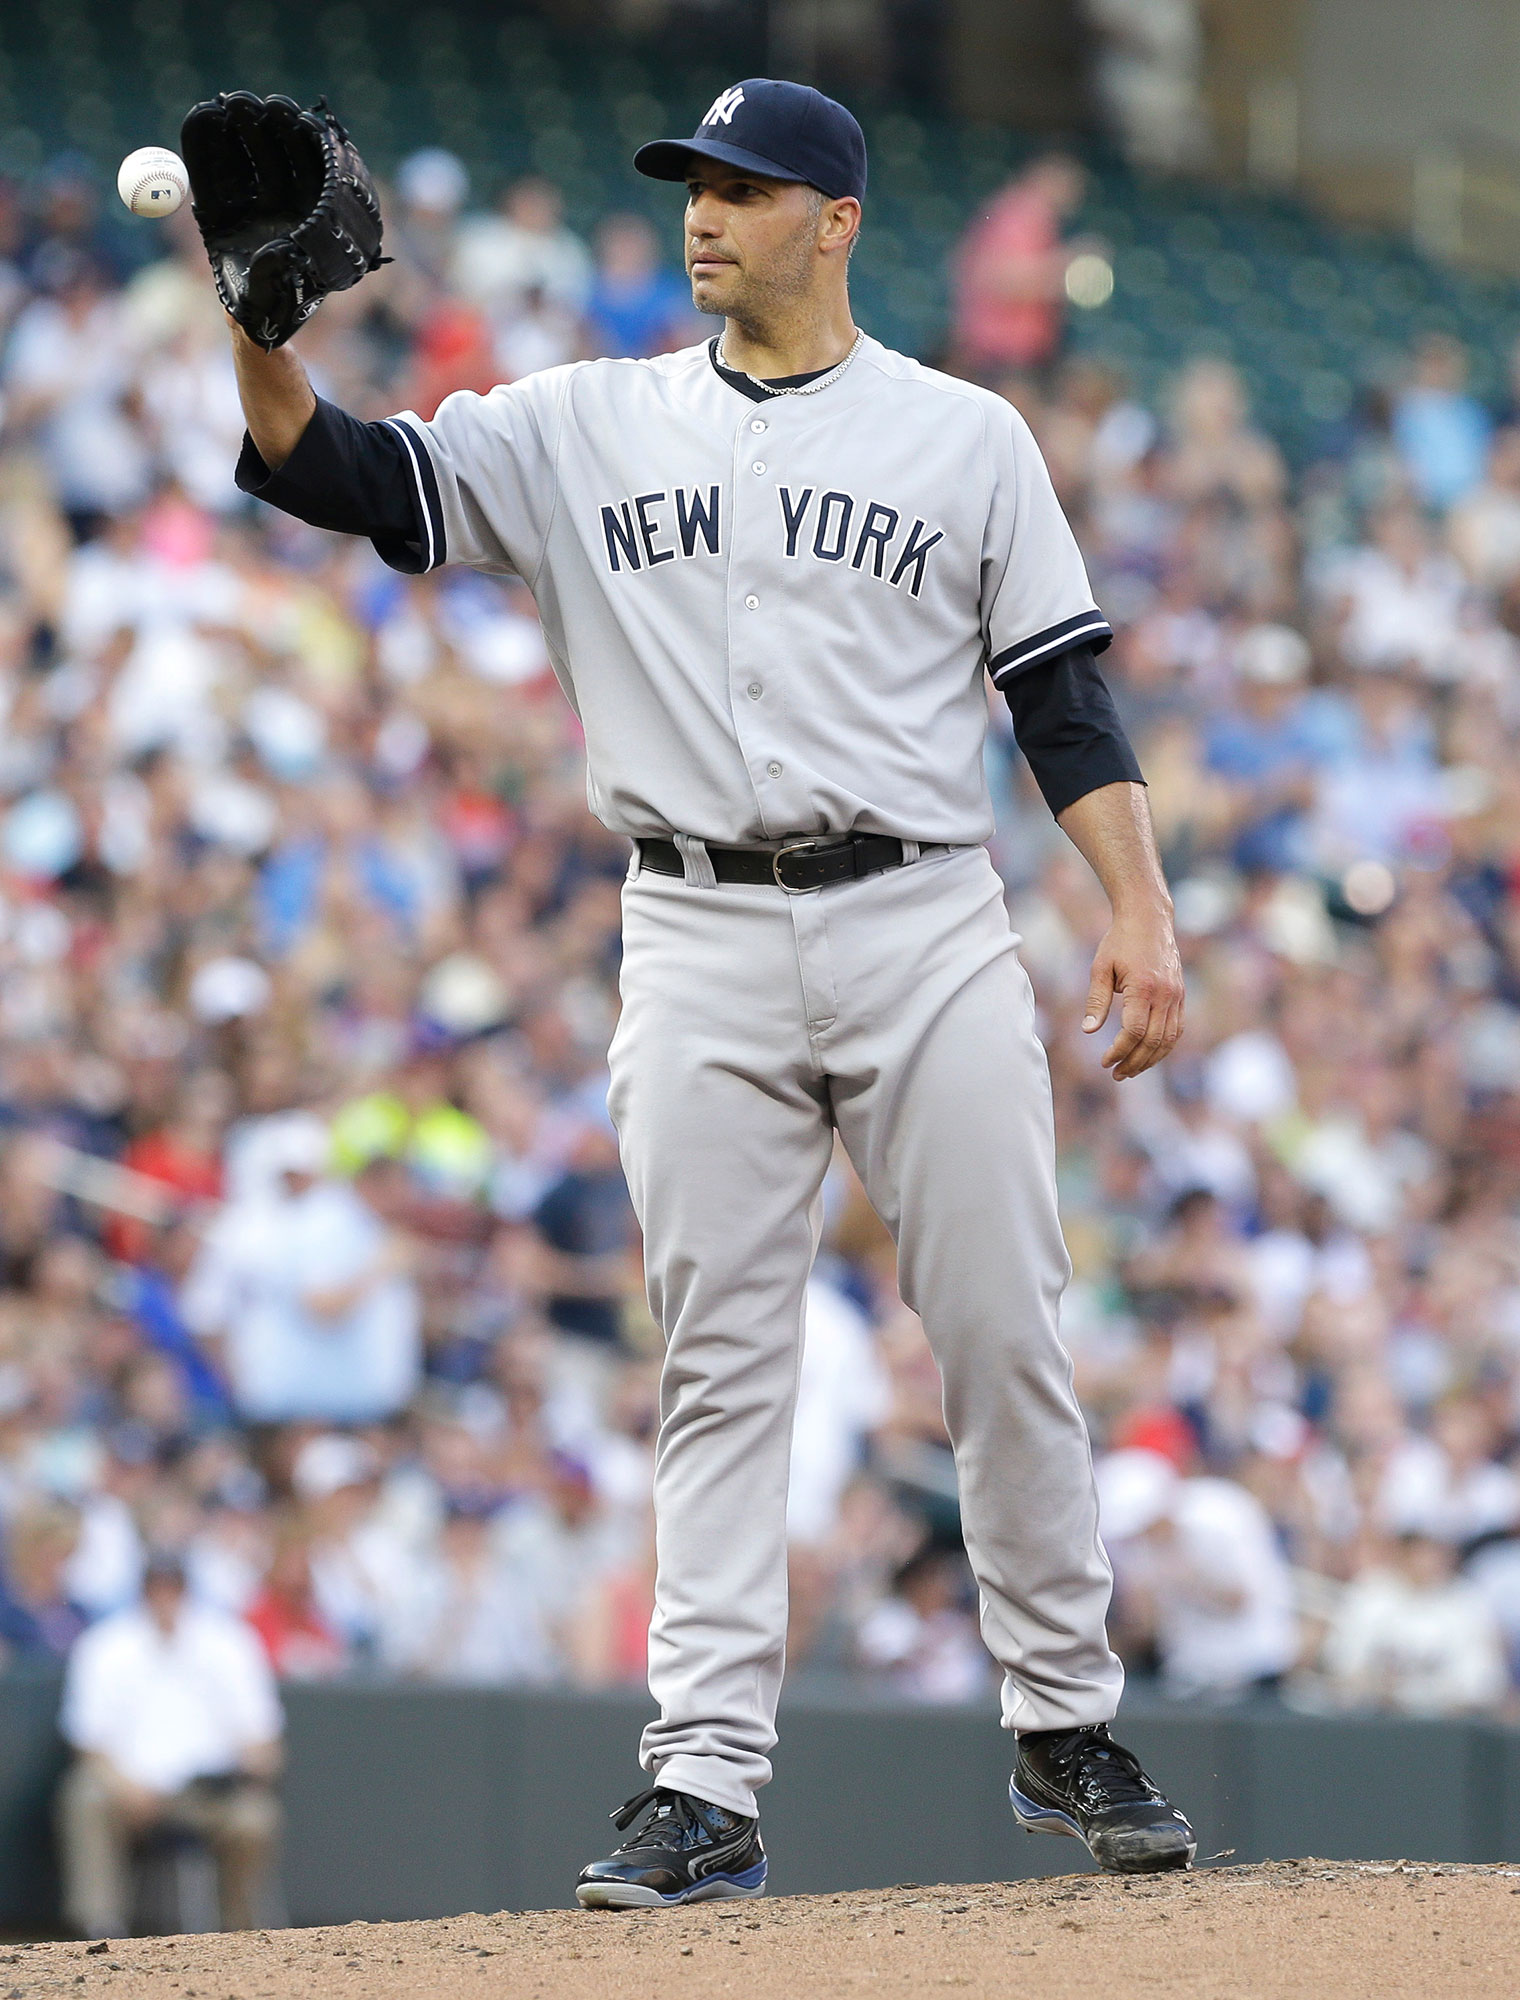 Yankees' legend Andy Pettitte gets my Hall of Fame vote. Here's the rest of  my ballot